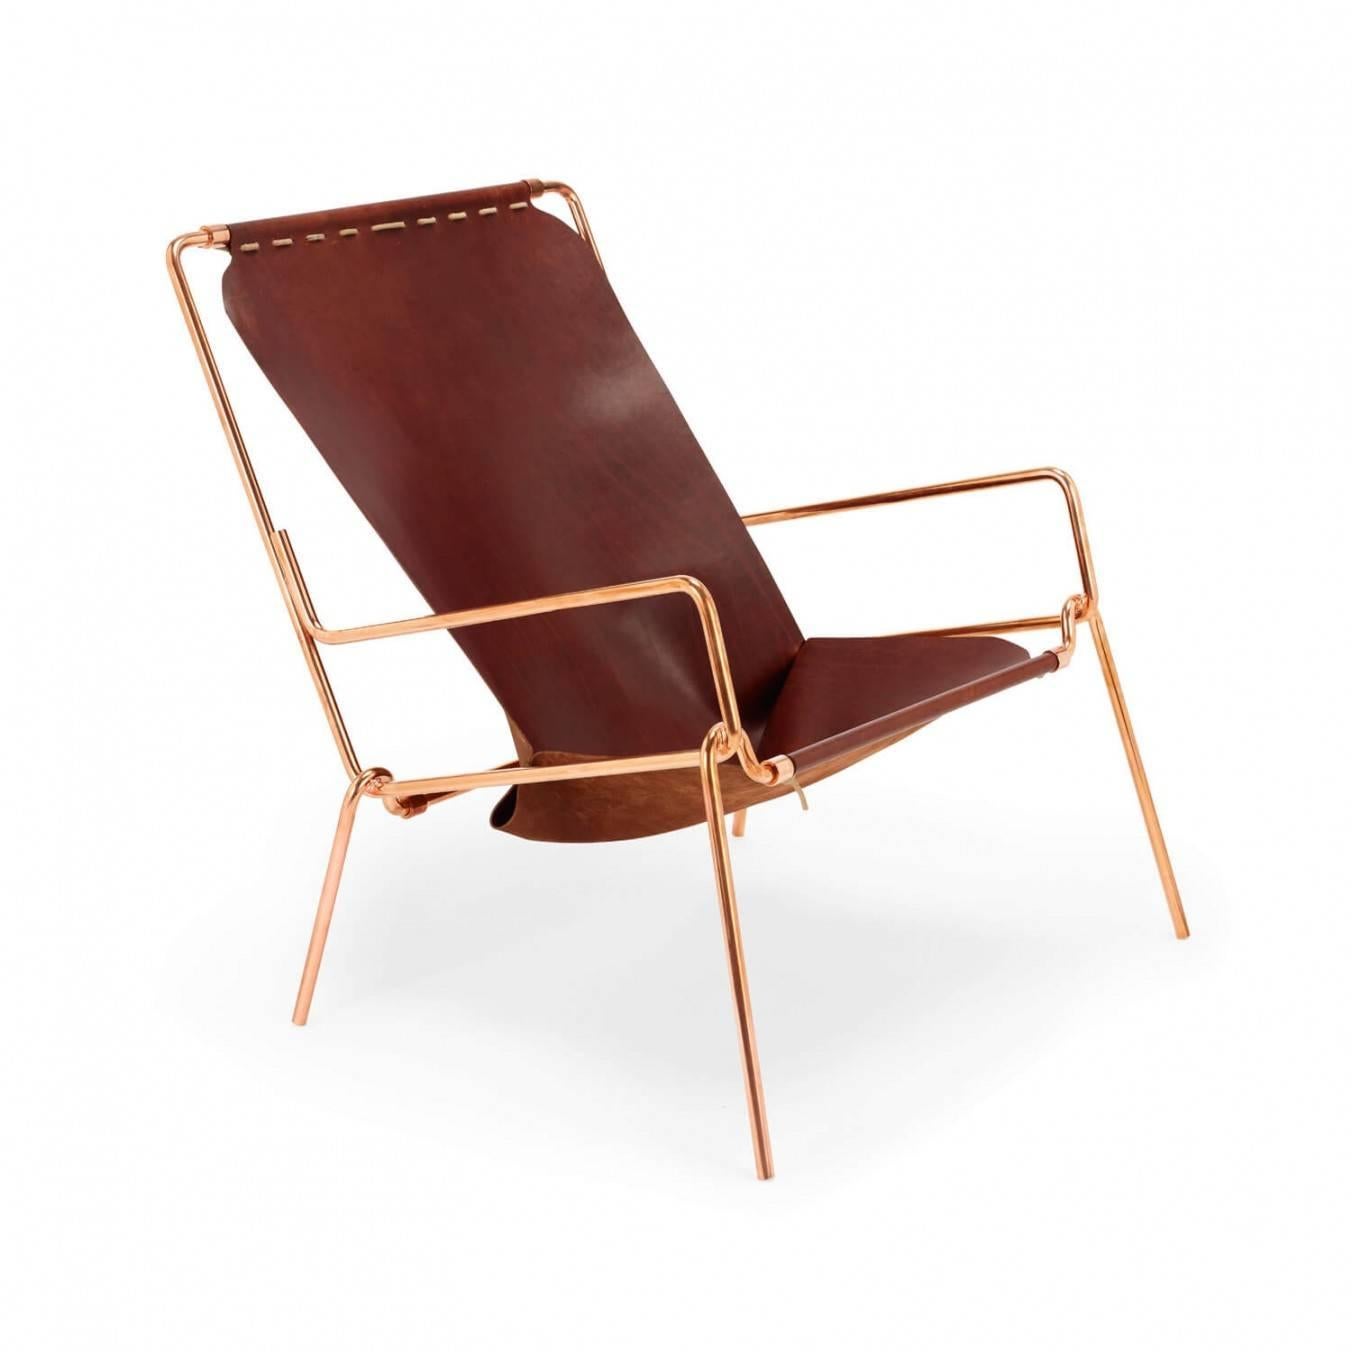 The tubular steel frame is hand bent and finished in Italy and can be disassembled to interchange the leather jackets.
The chair is made out of a single piece of vegetable tanned leather and is handmade in England.
This chair only uses copper